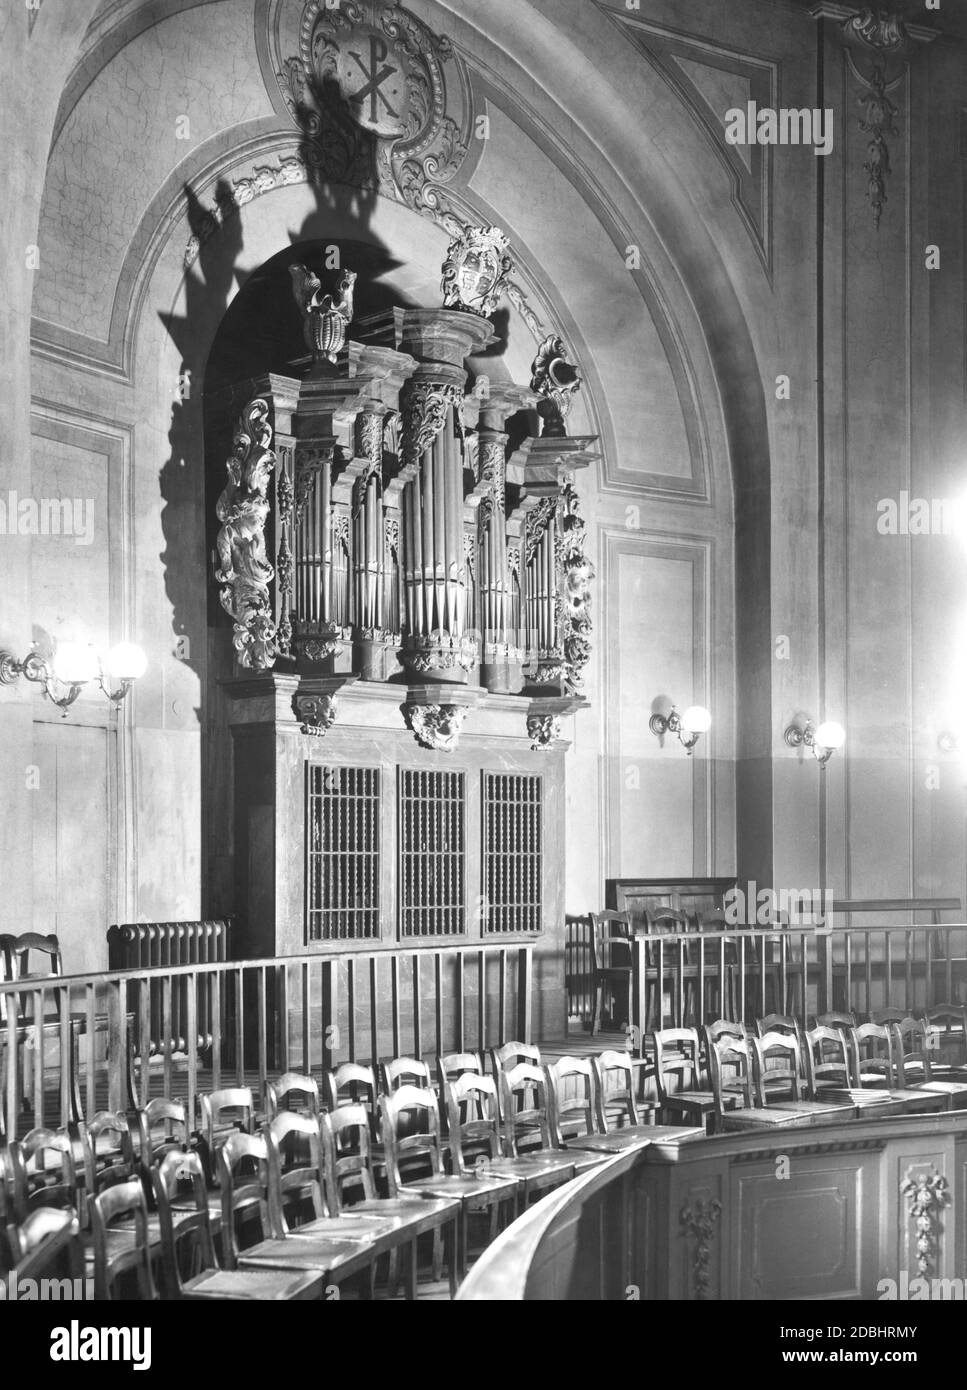 The photograph shows the organ in the interior of the Dreifaltigkeitskirche (Trinity Church) in Berlin-Mitte in 1939, with the coat of arms of the von Beneckendorff and von Hindenburg families directly above. Stock Photo